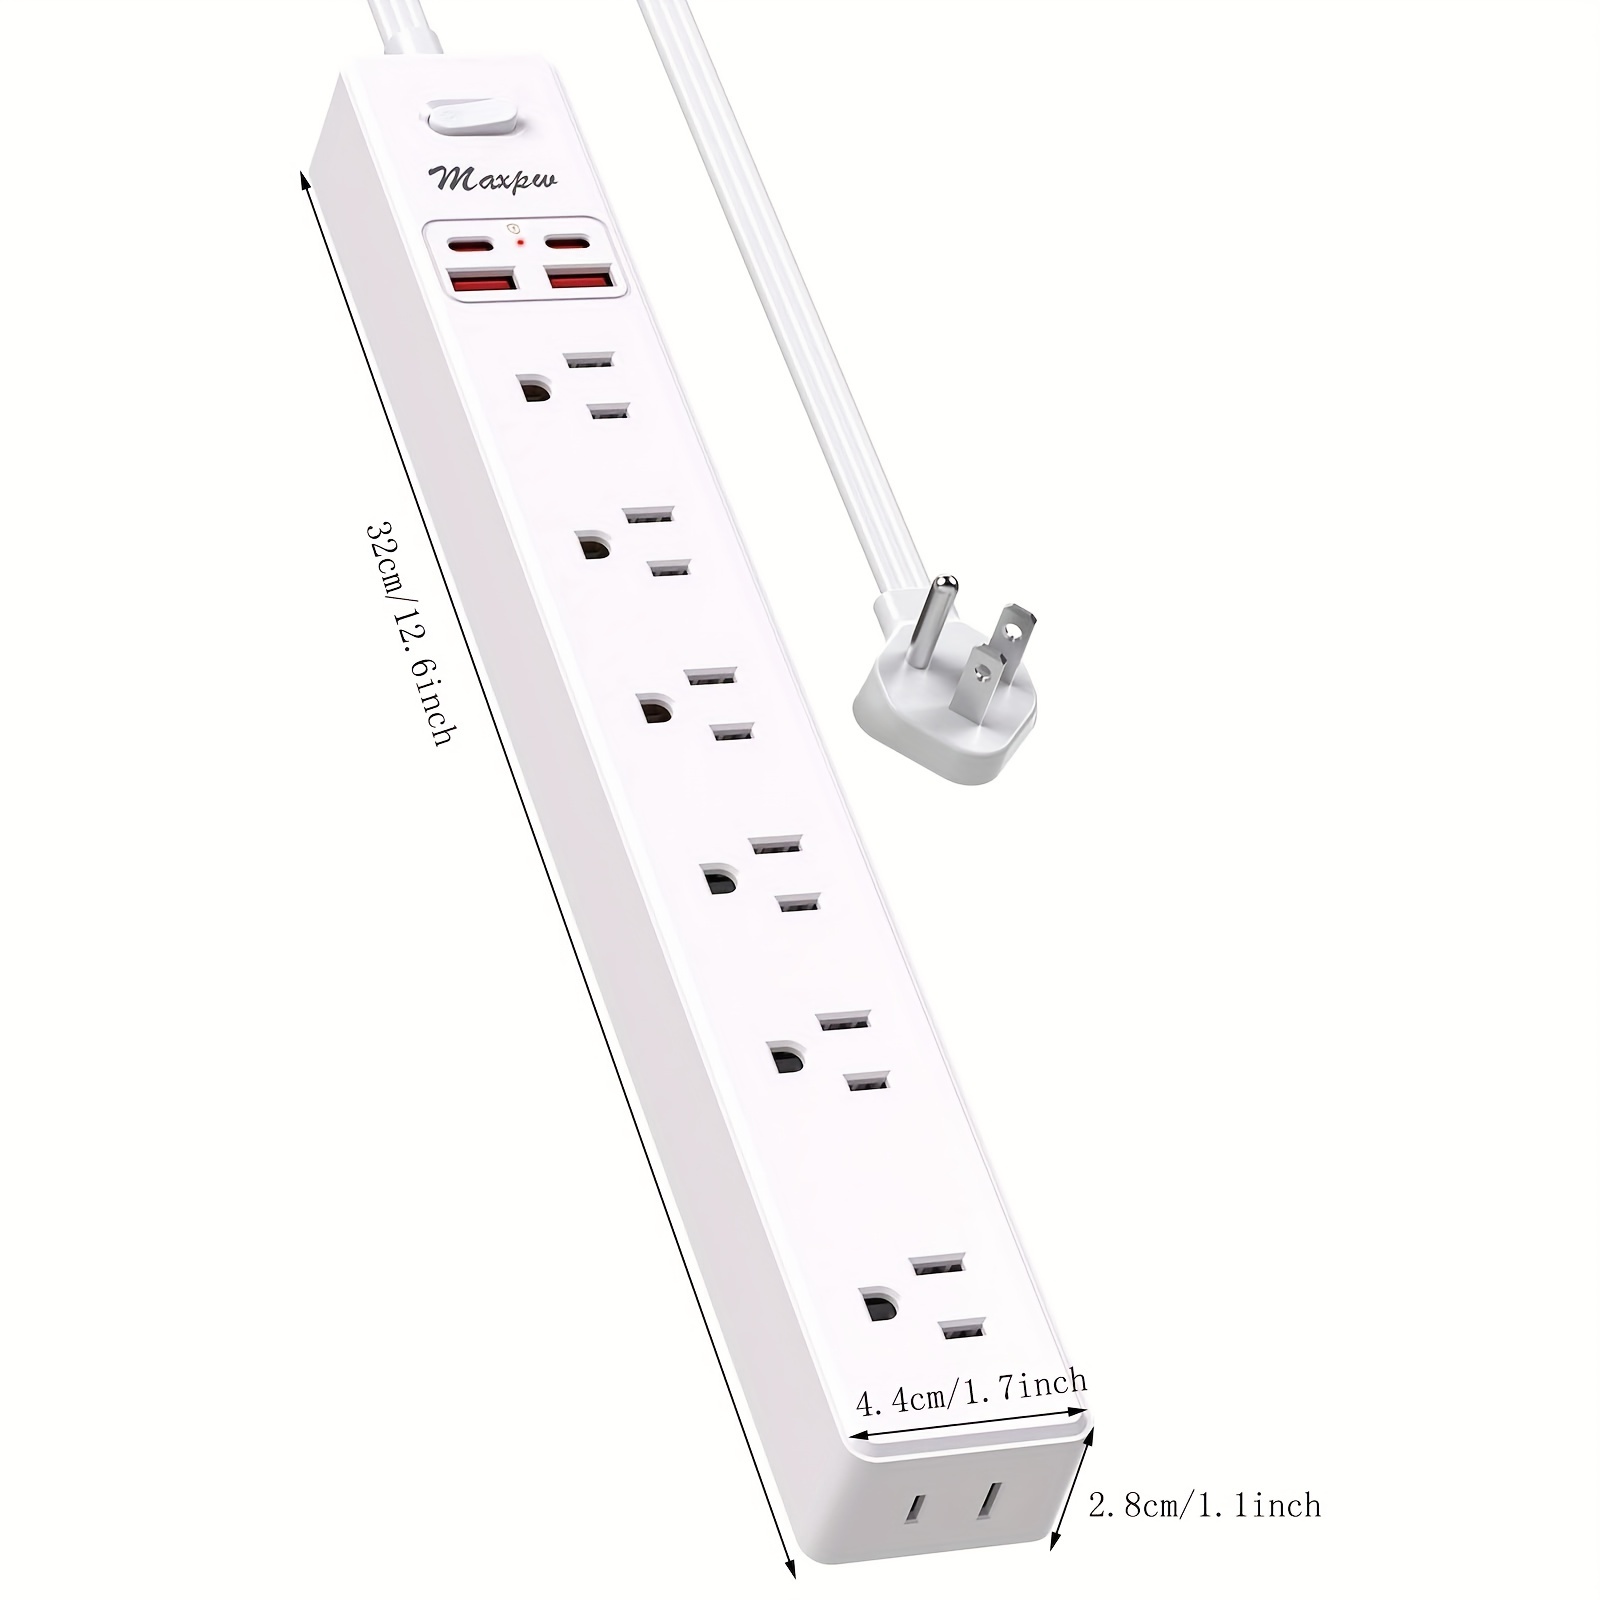 Flat Plug Power Strip, Ultra Thin Extension Cord - Addtam 12 Widely AC 3  Sides Multiple Outlets, 5Ft, 900J Surge Protector, Wall Mount, Desk  Charging